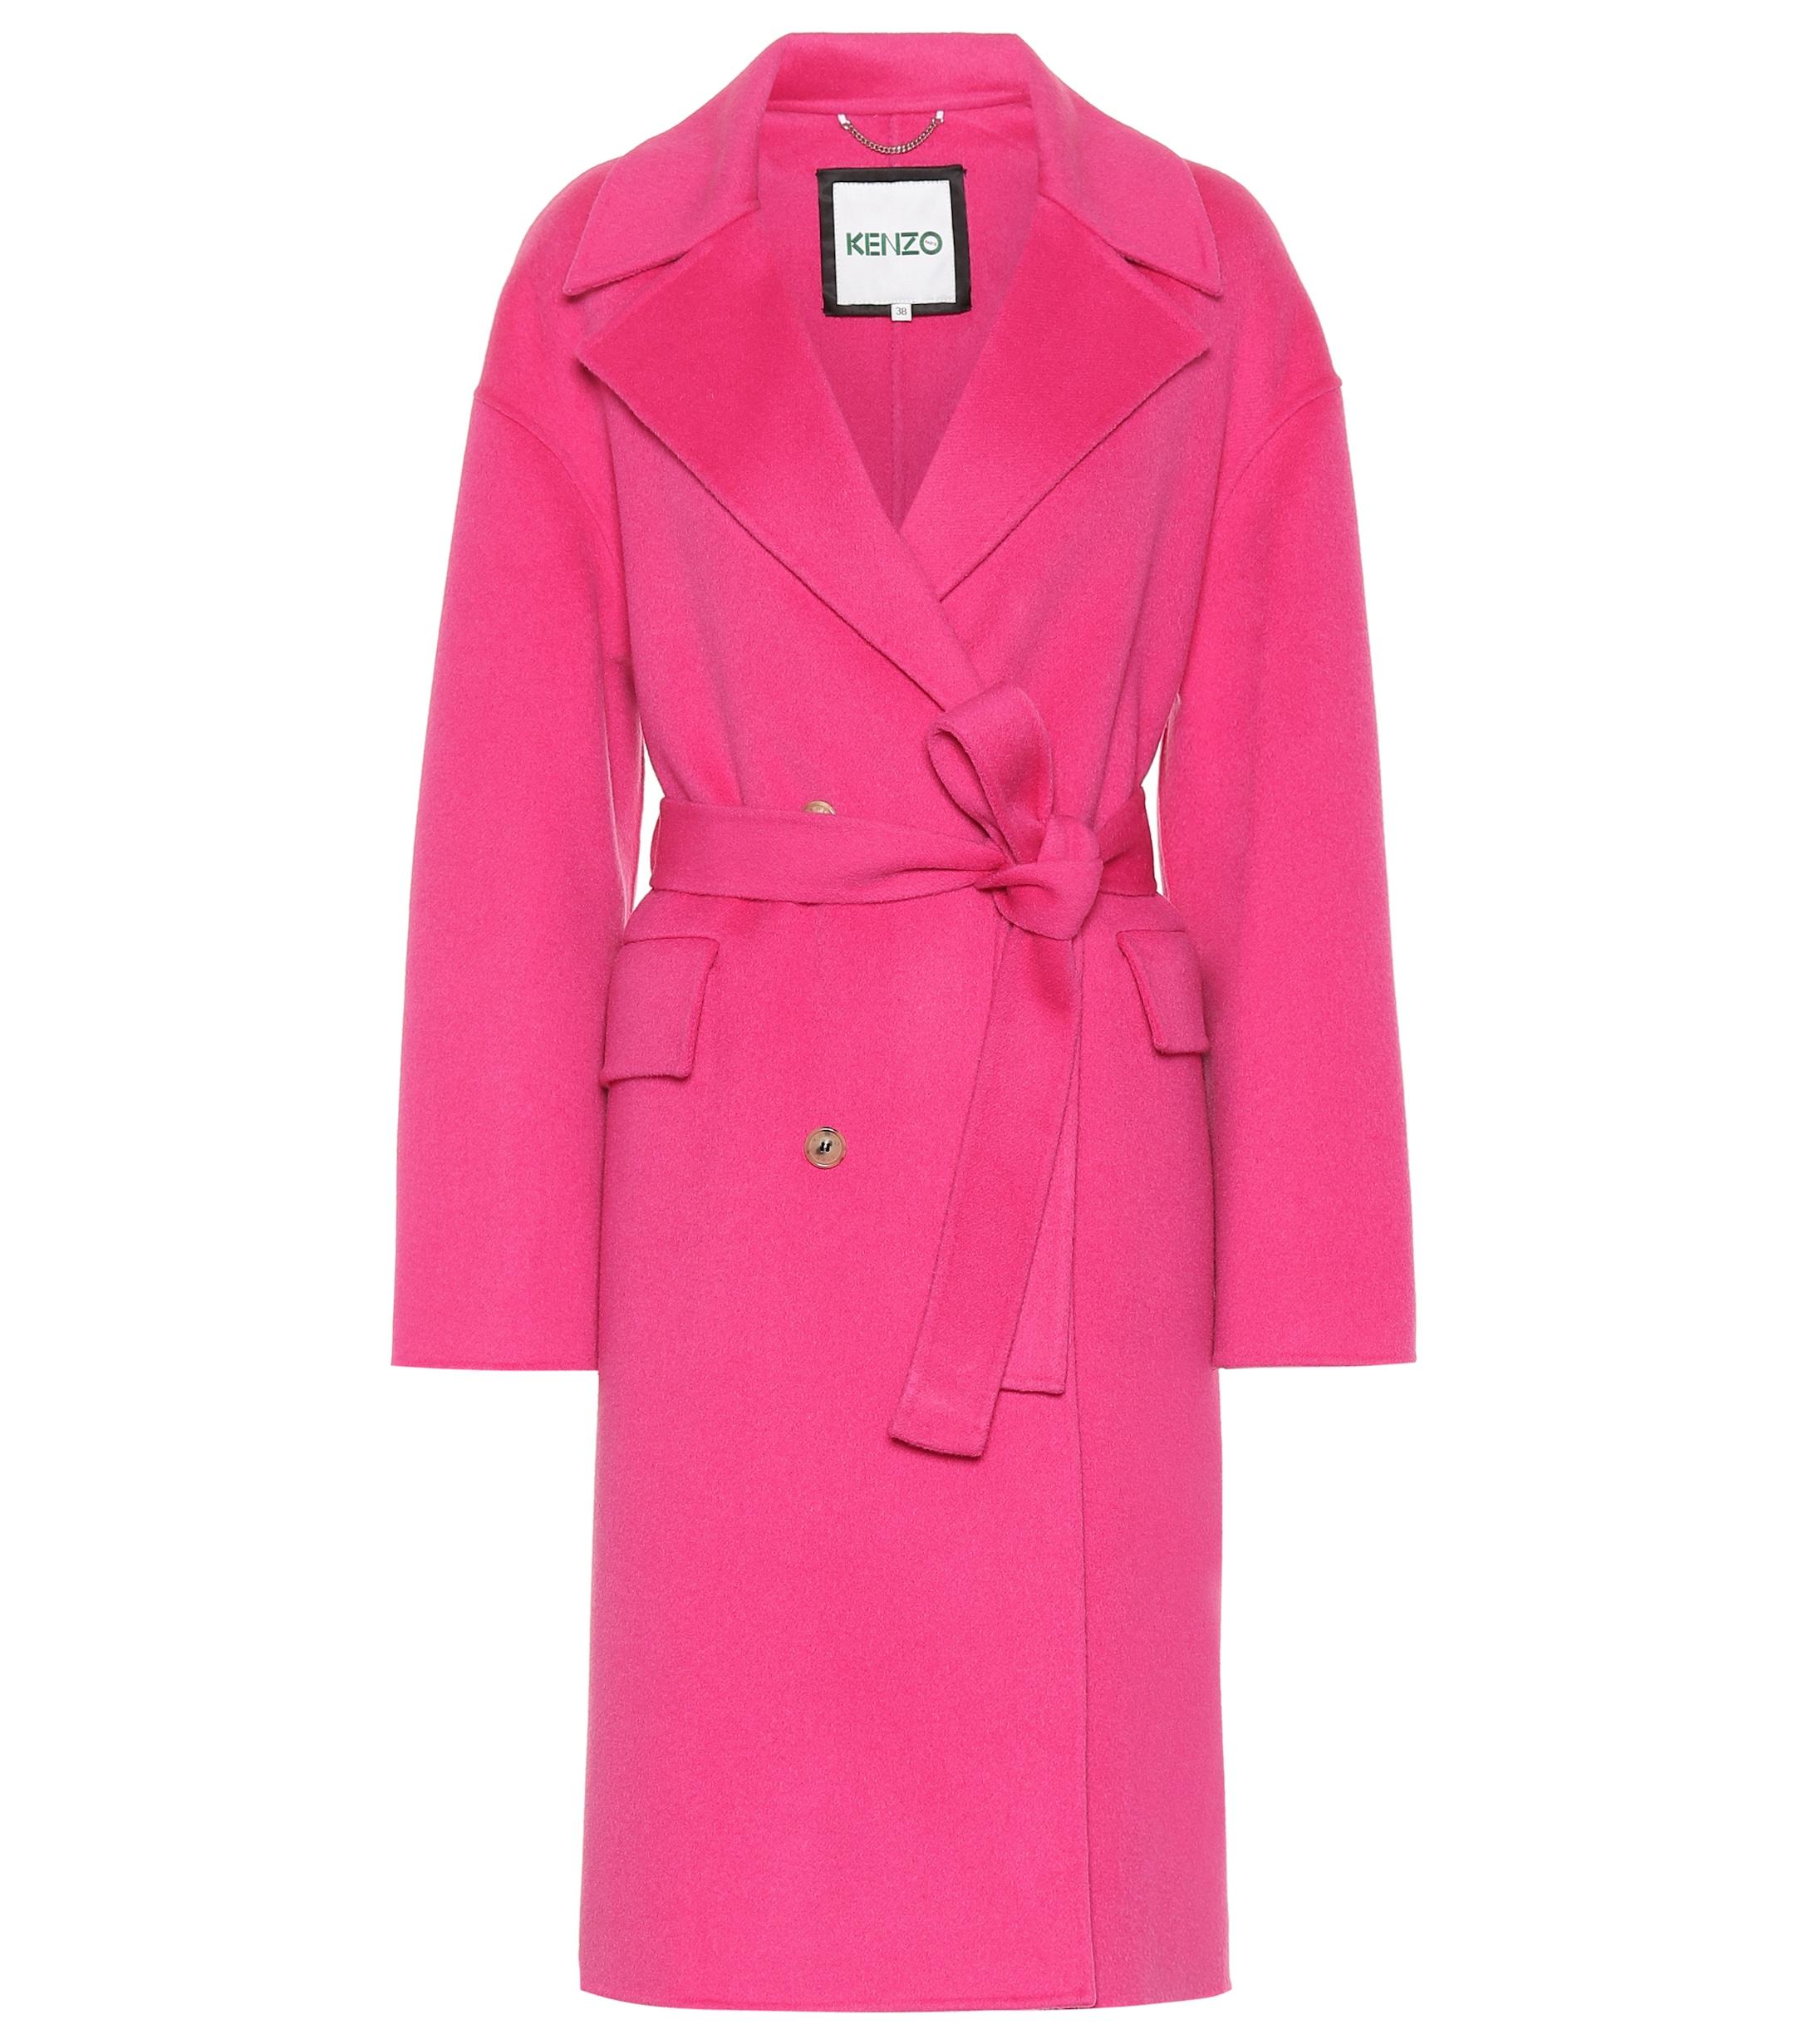 KENZO Wool And Cashmere Coat in Pink - Lyst